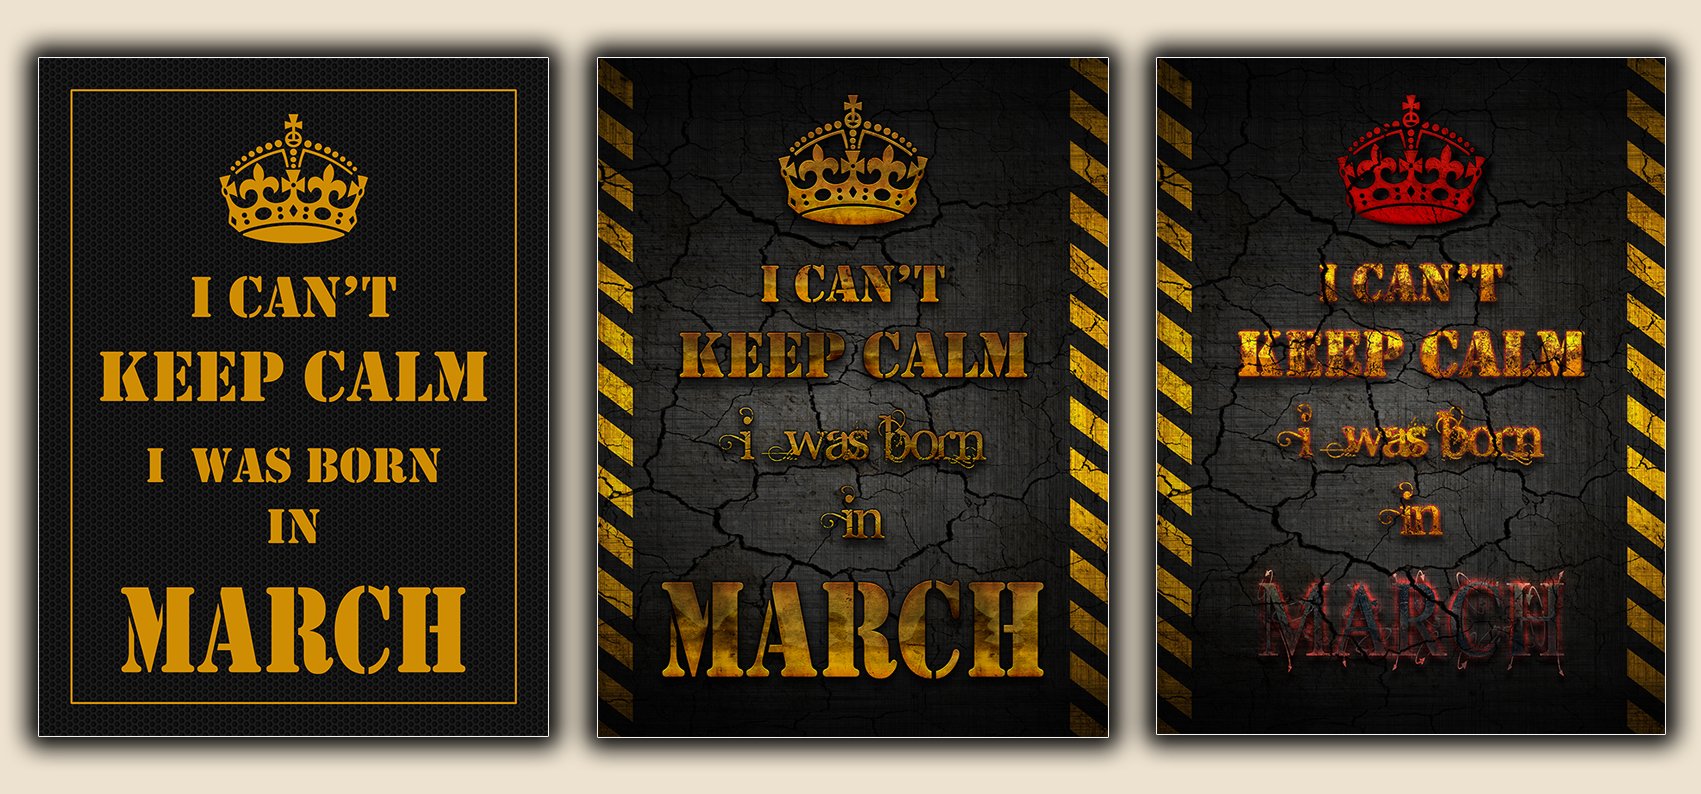 I Can't Keep Calm - I was Born in March